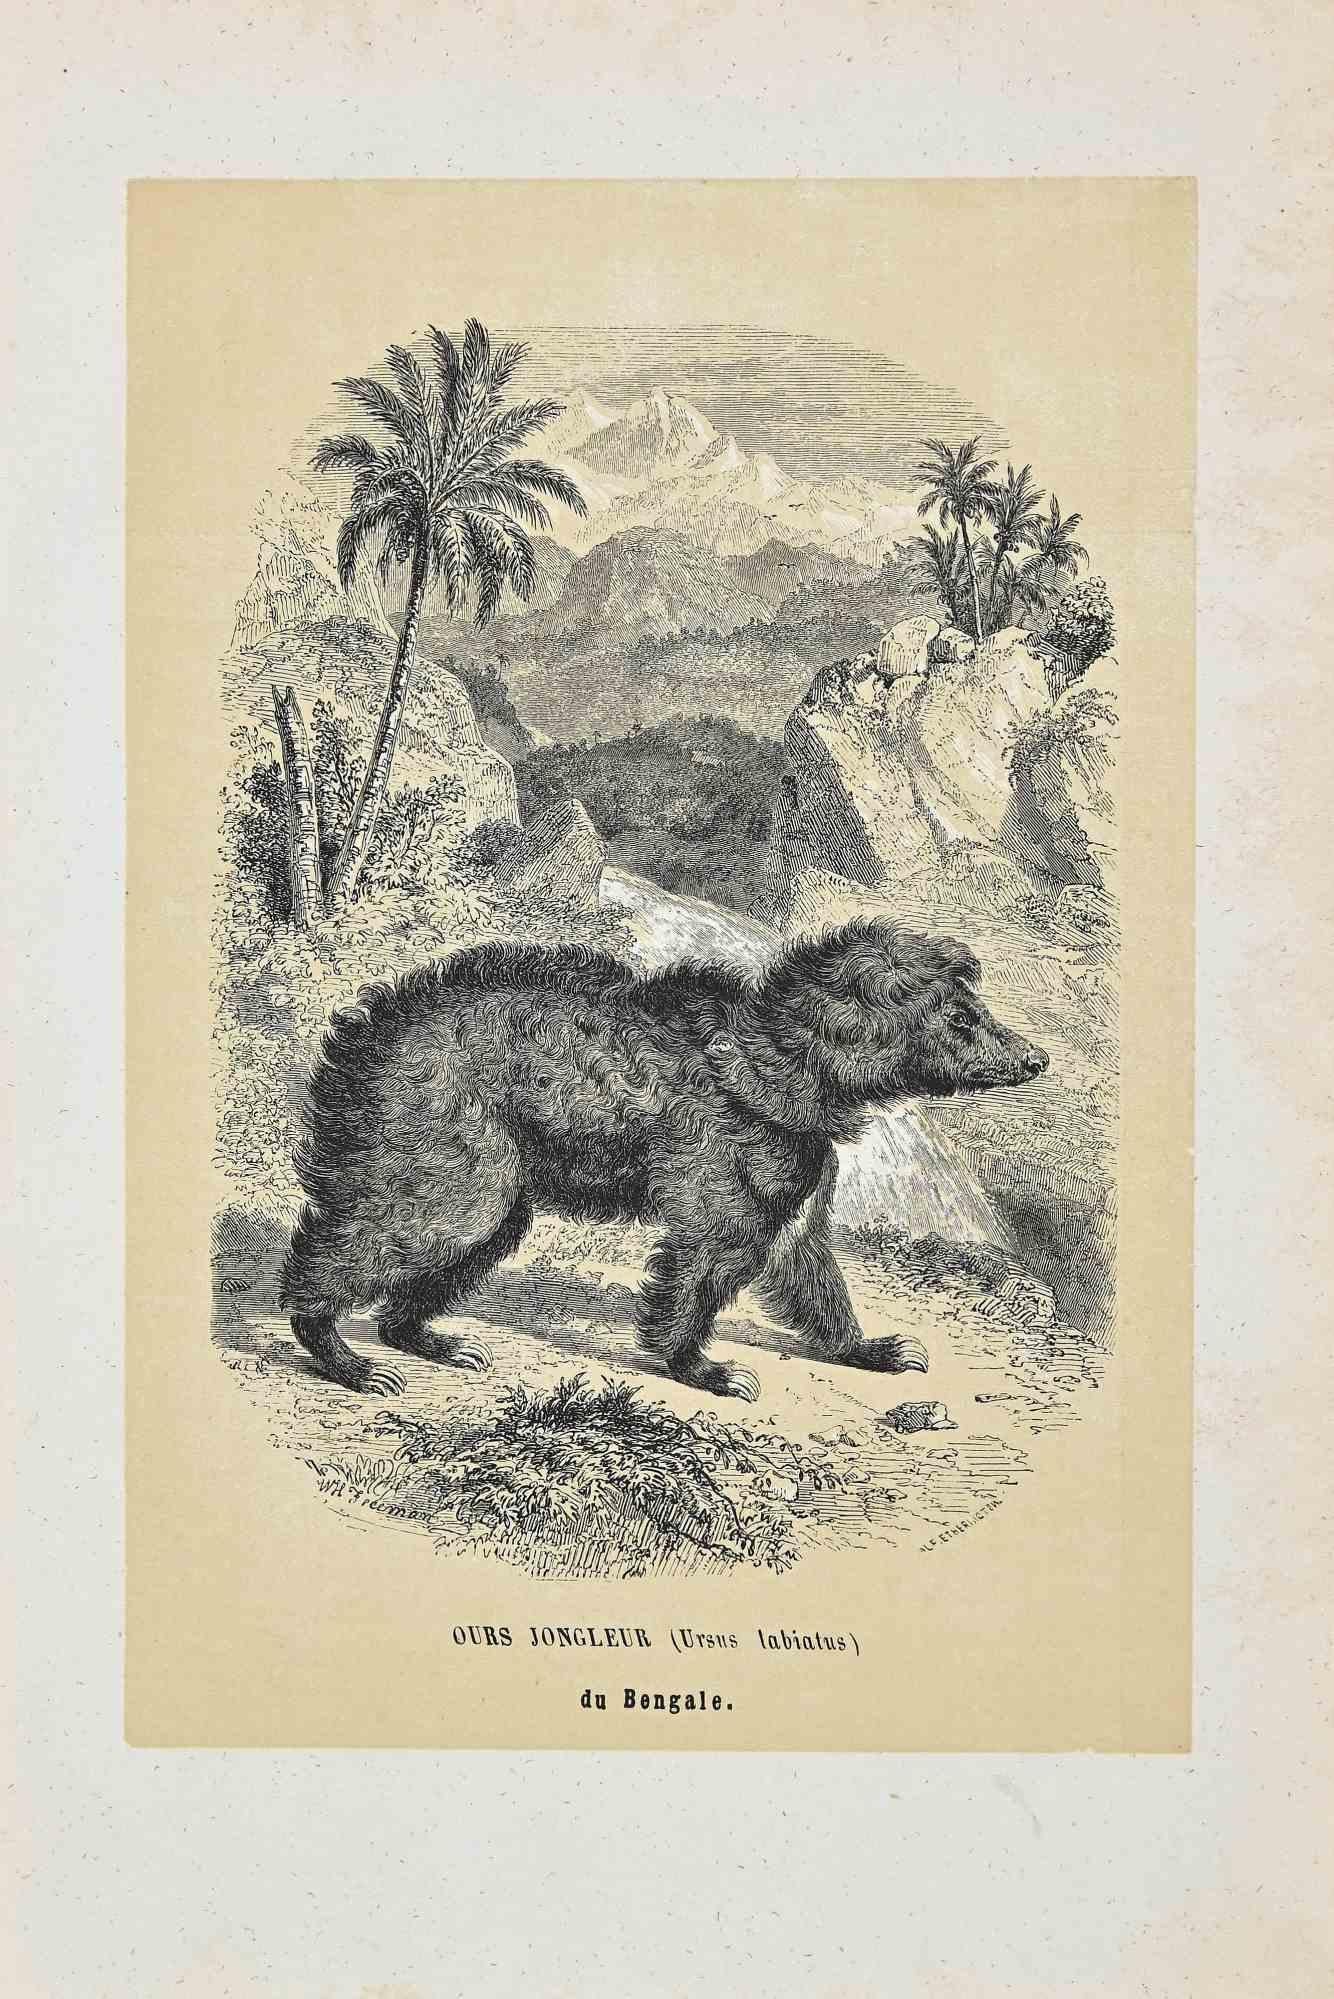 Ours Jongleur an original lithograph with stencil on ivory-colored paper, realized by Paul Gervais (1816-1879). The artwork is from The Series of "Les Trois Règnes de la Nature", and was published in 1854.

Good conditions.

Titled on the